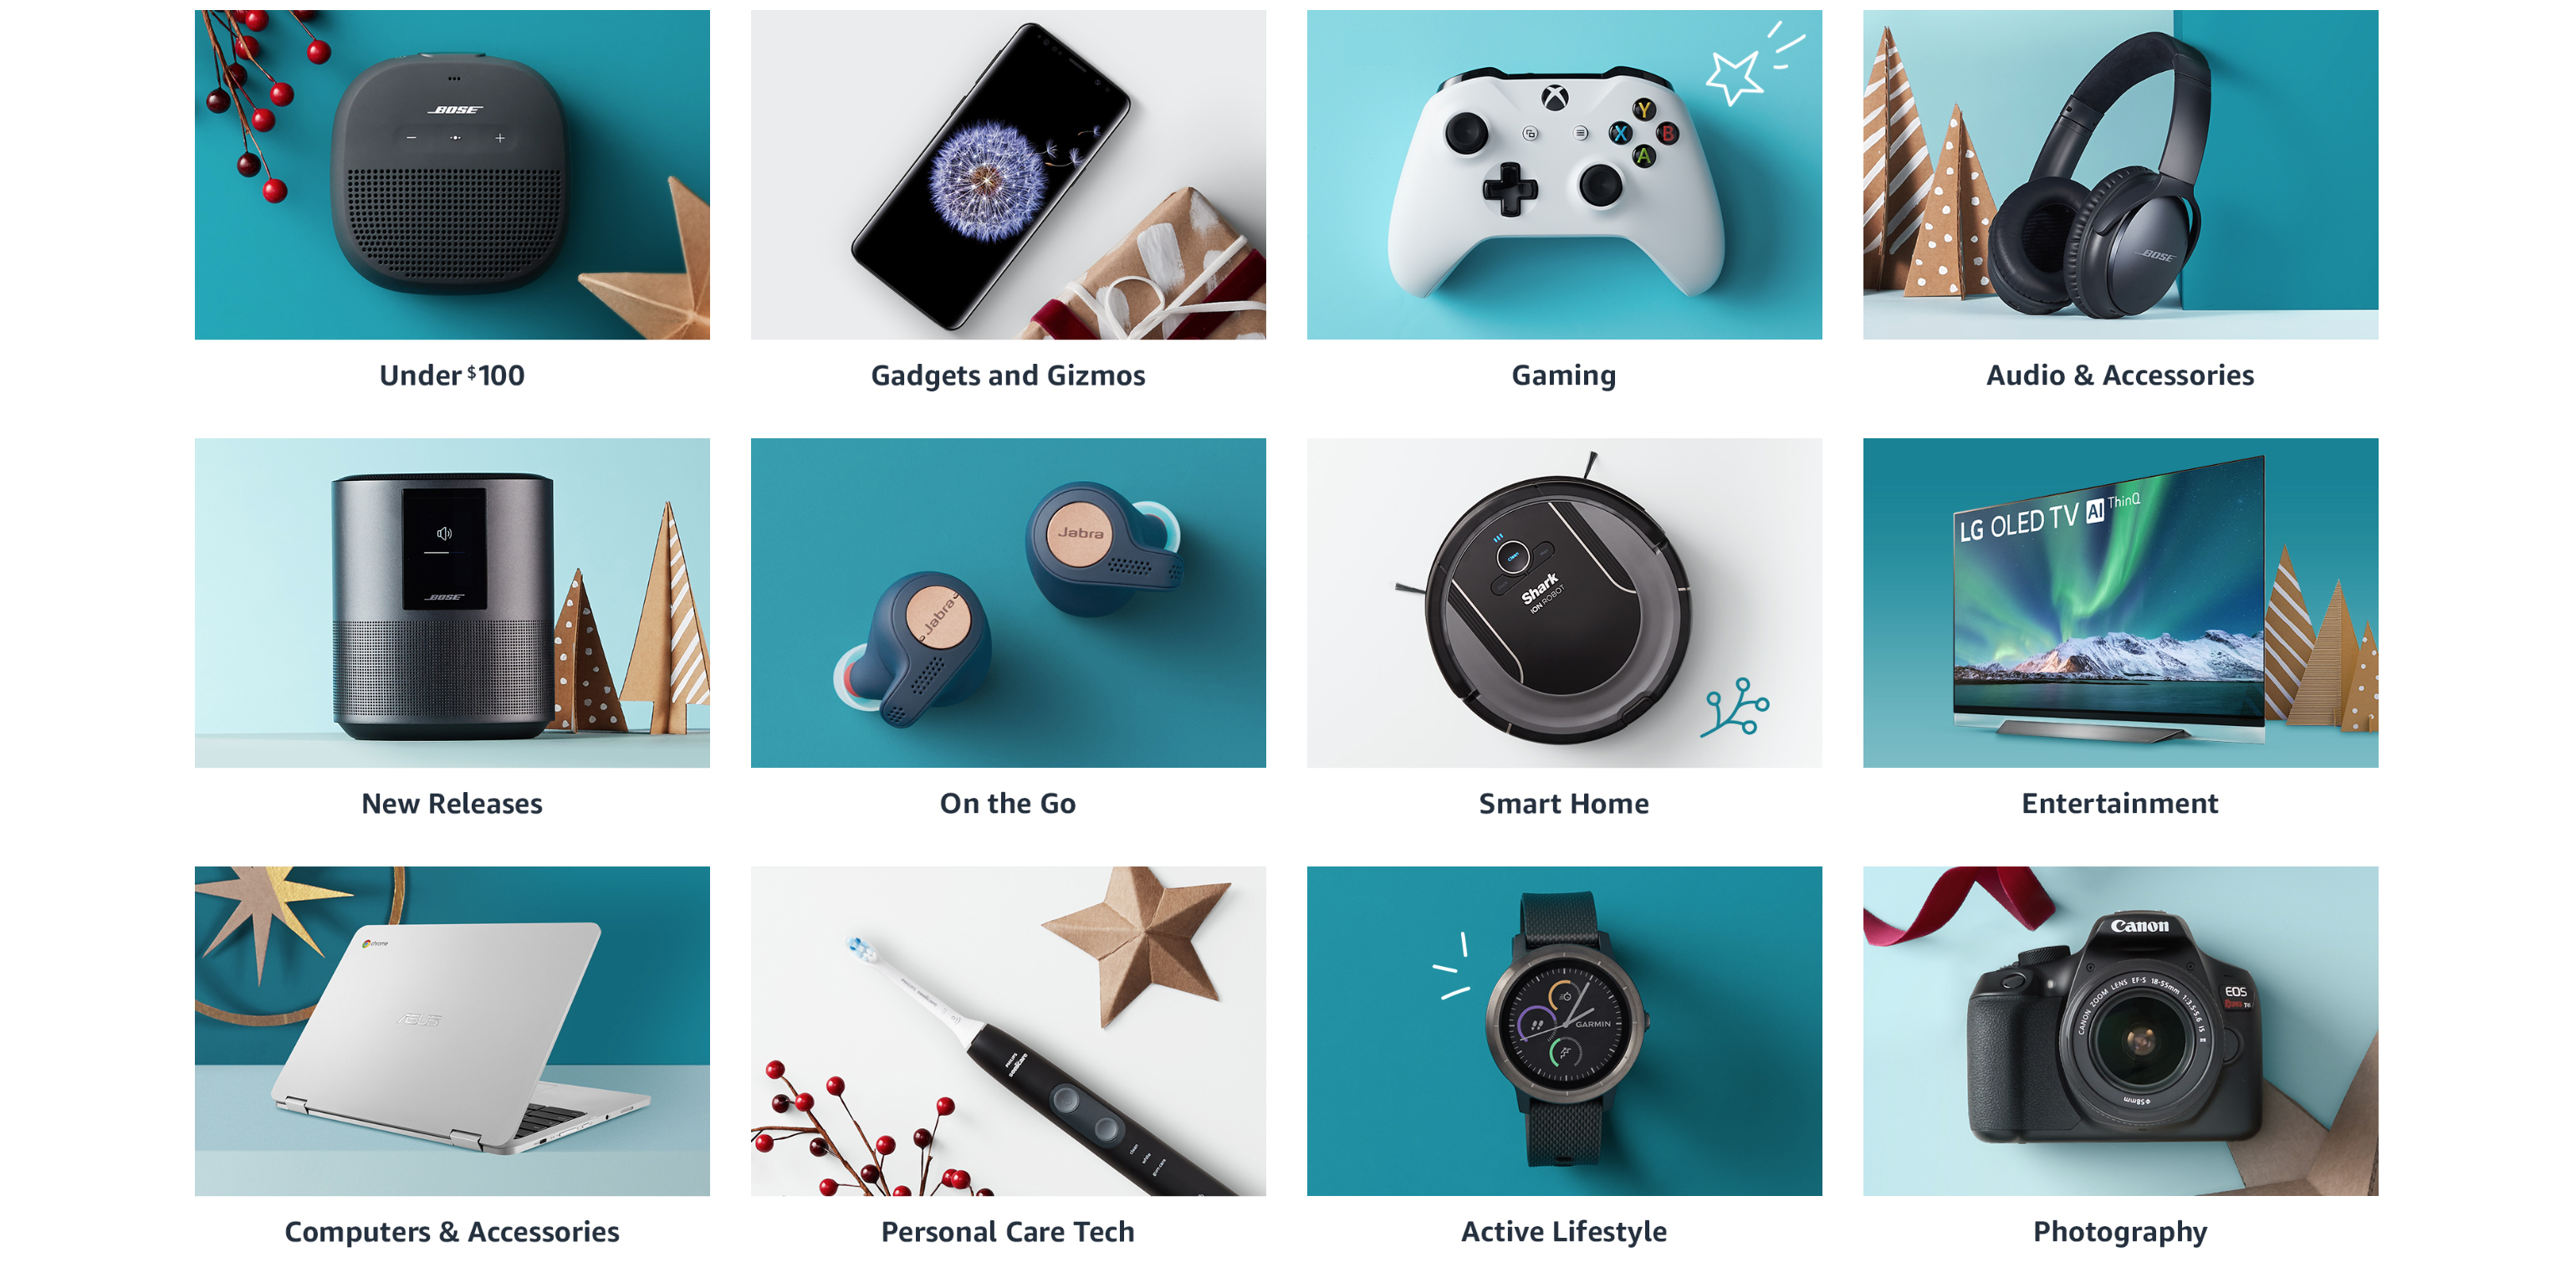 10 Smart gadgets to make your life easier (Holiday gift guide 2018)